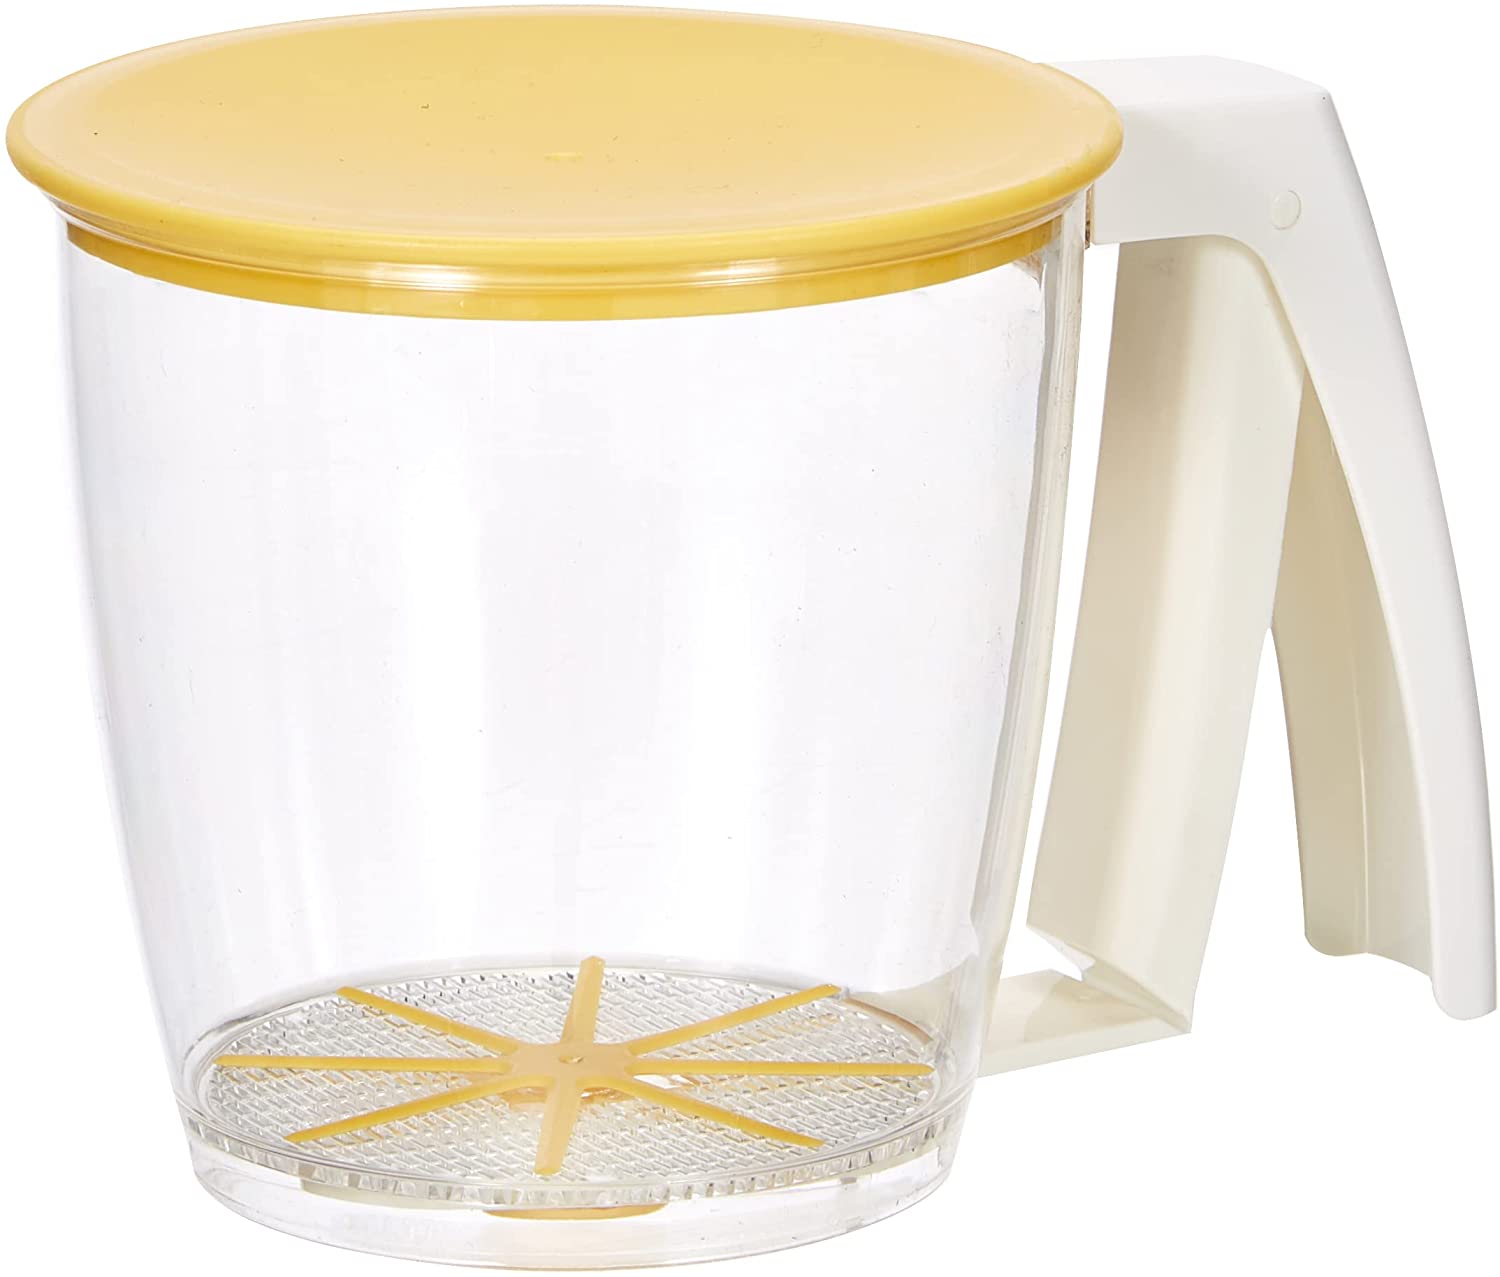 Tescoma One-handed sieve with lid, for flour or icing sugar, made of plastic, BPA-free